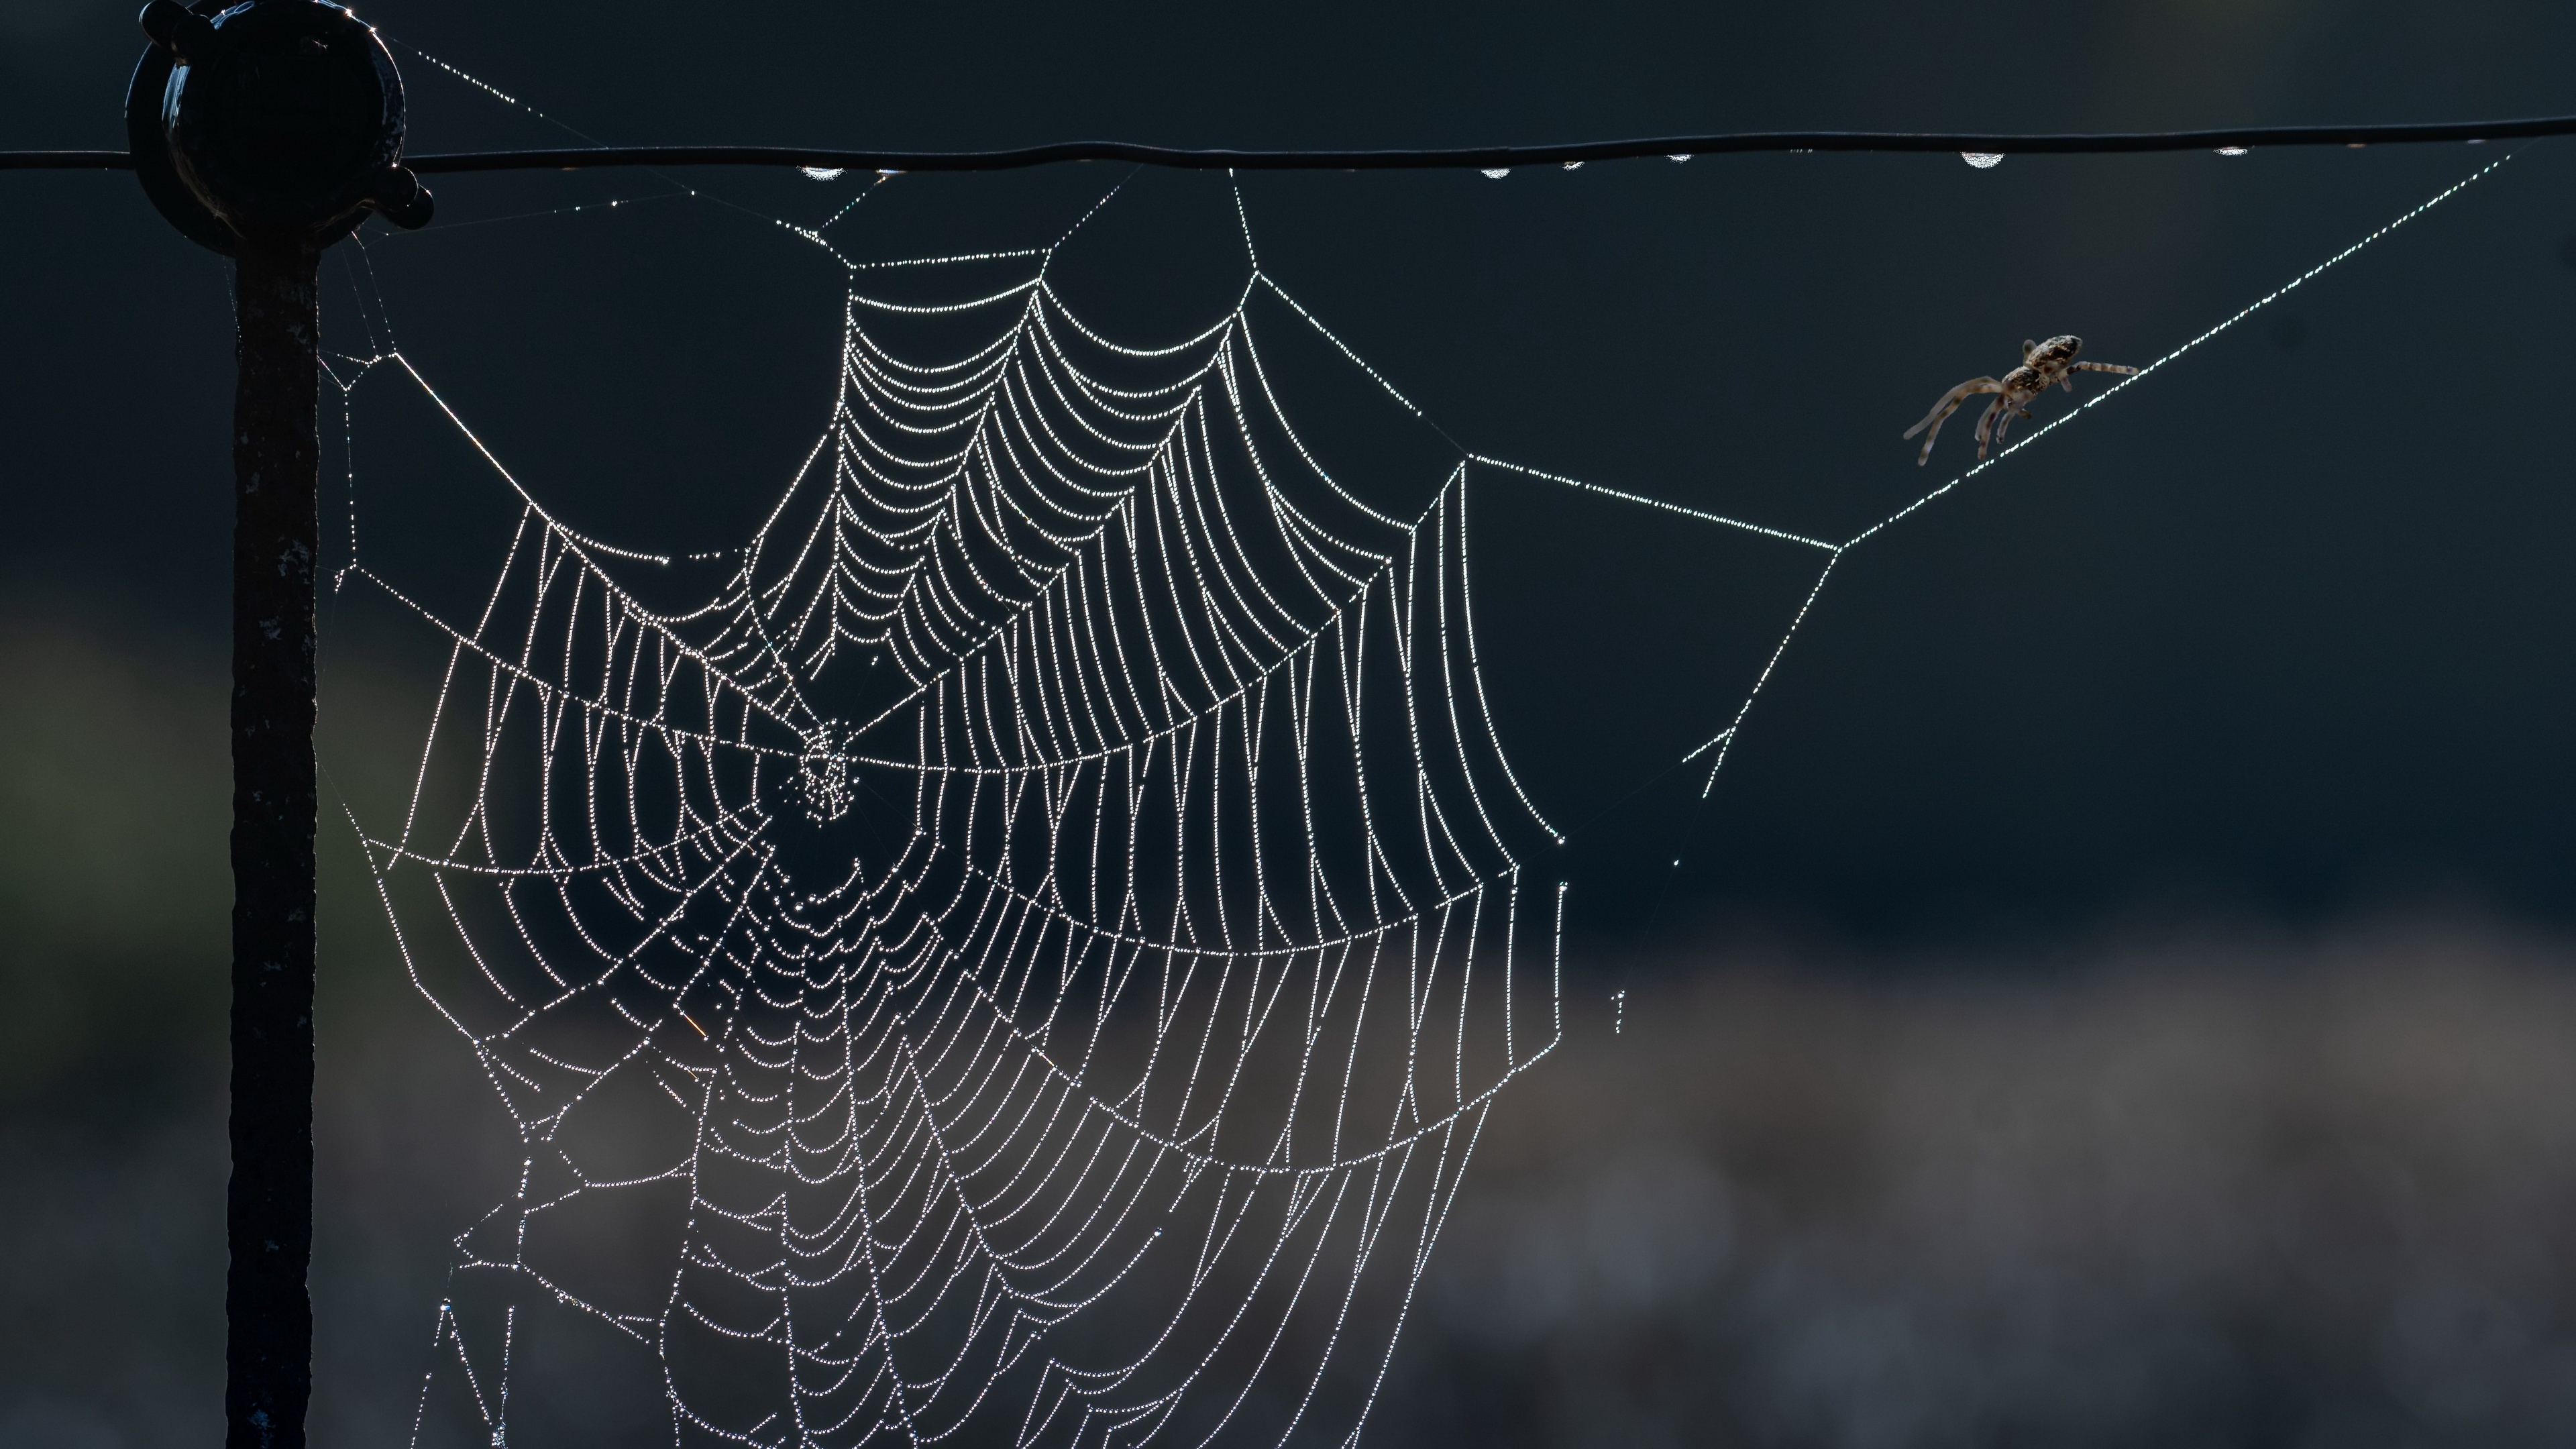 3840x2160 10+ 4K Spider Web Wallpapers | Background Images